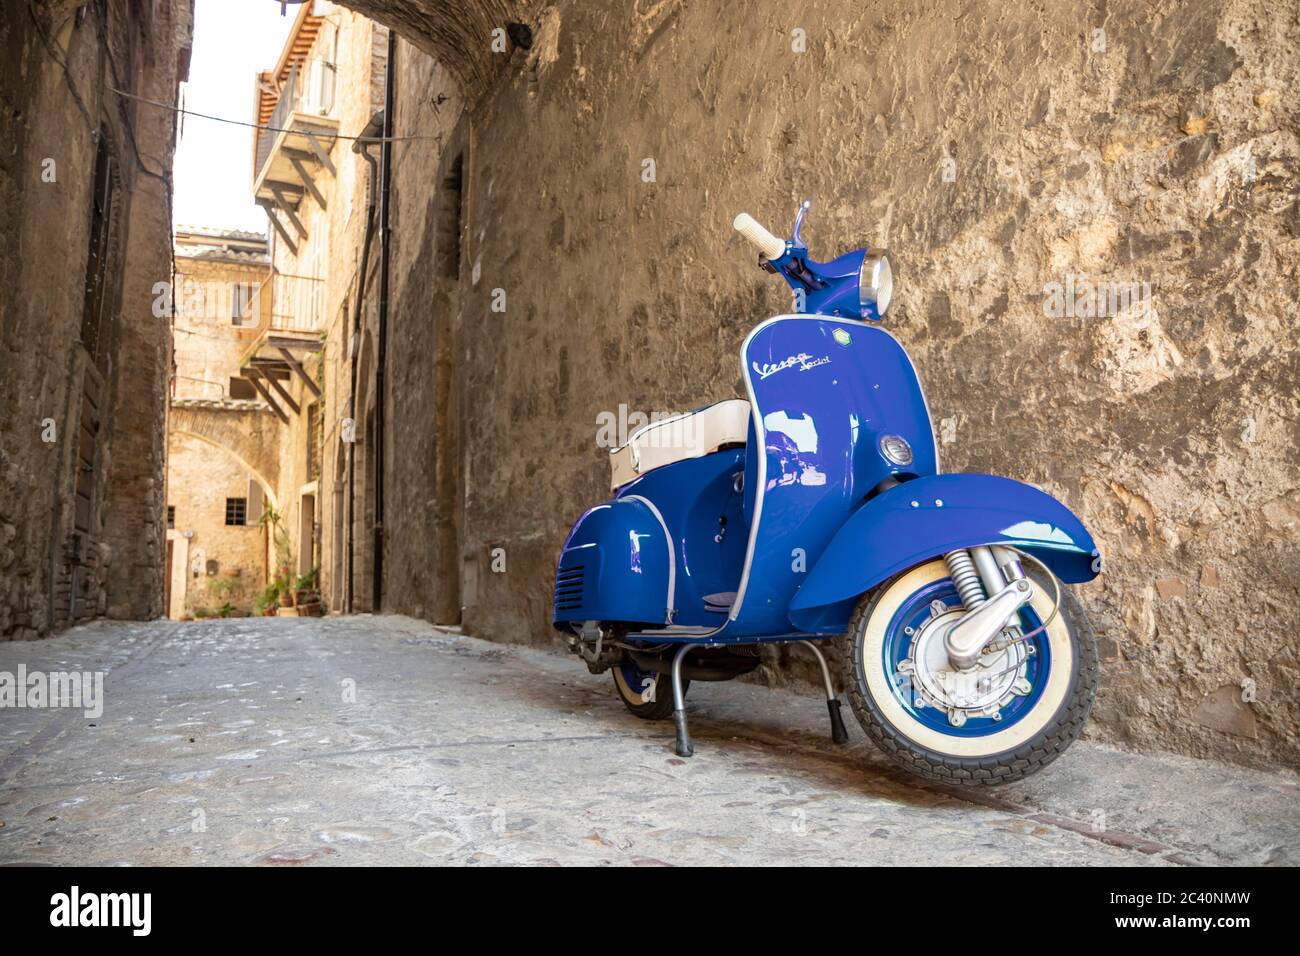 June 30, 2019 - Rome, Lazio, Italy - A blue Piaggio Vespa Sprint, parked in an alleyway of an ancient village, in Italy. The scooter symbol of Italian Stock Photo